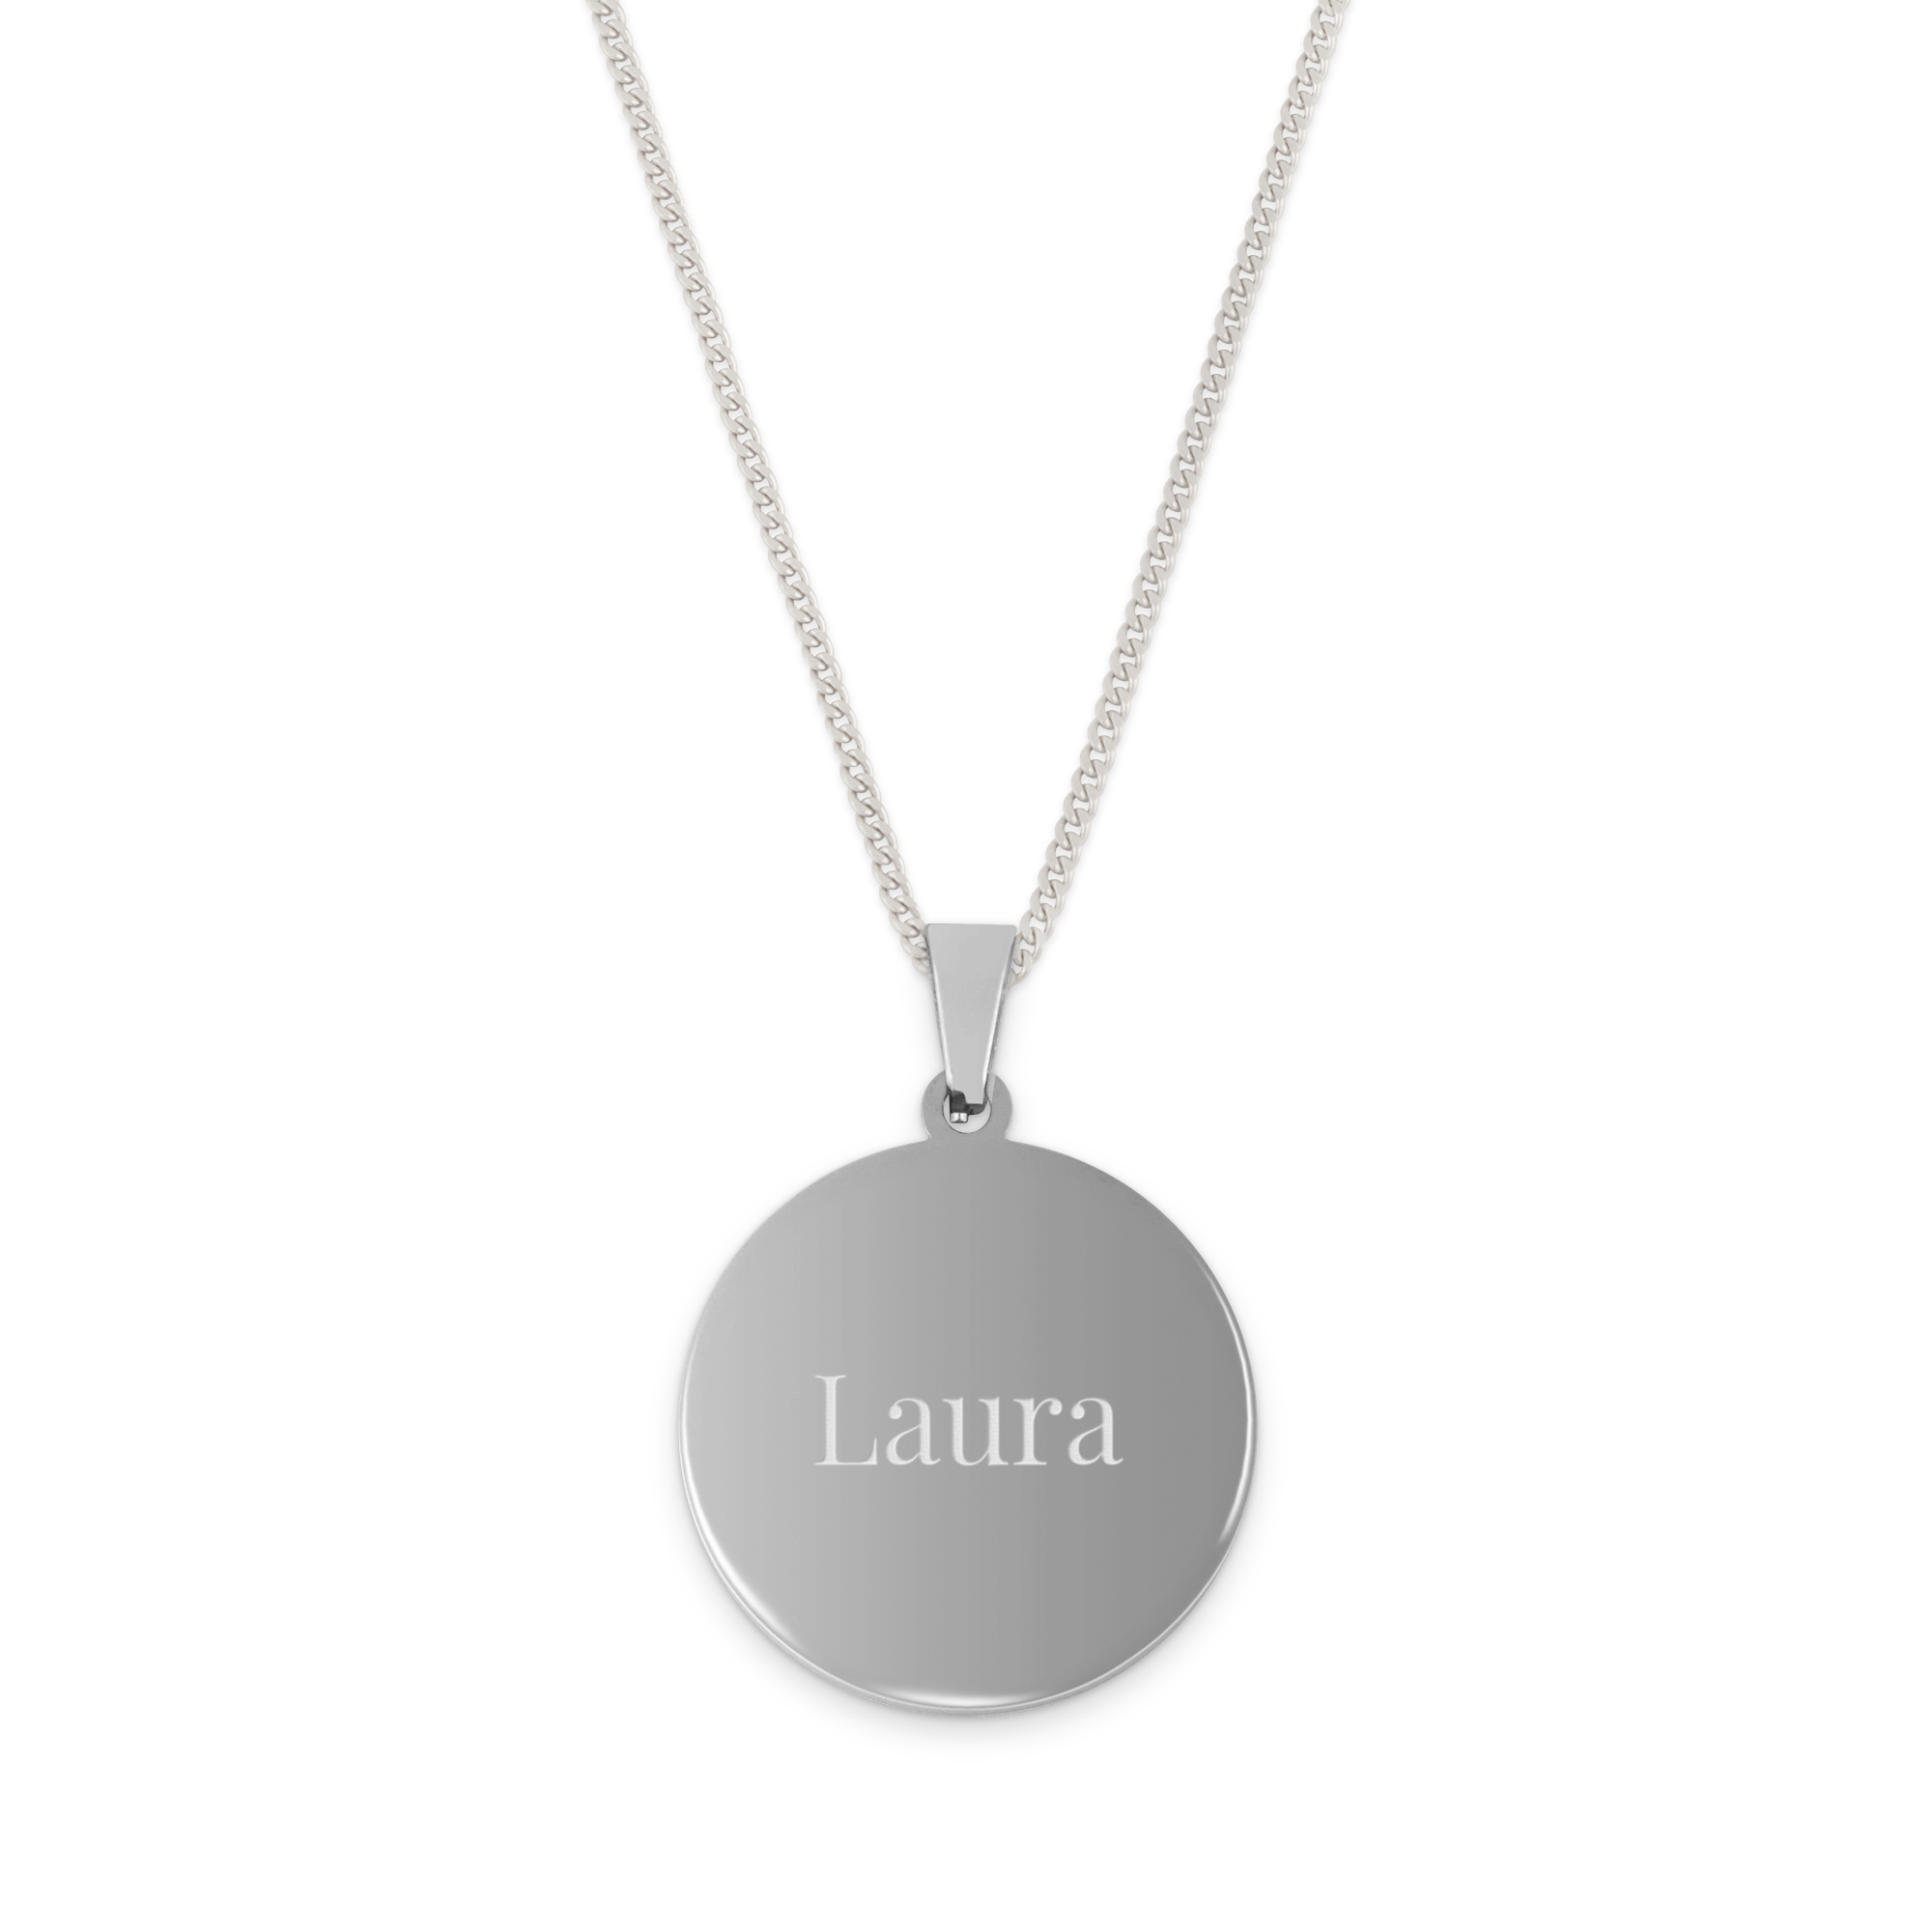 Necklace round pendant with text - Silver